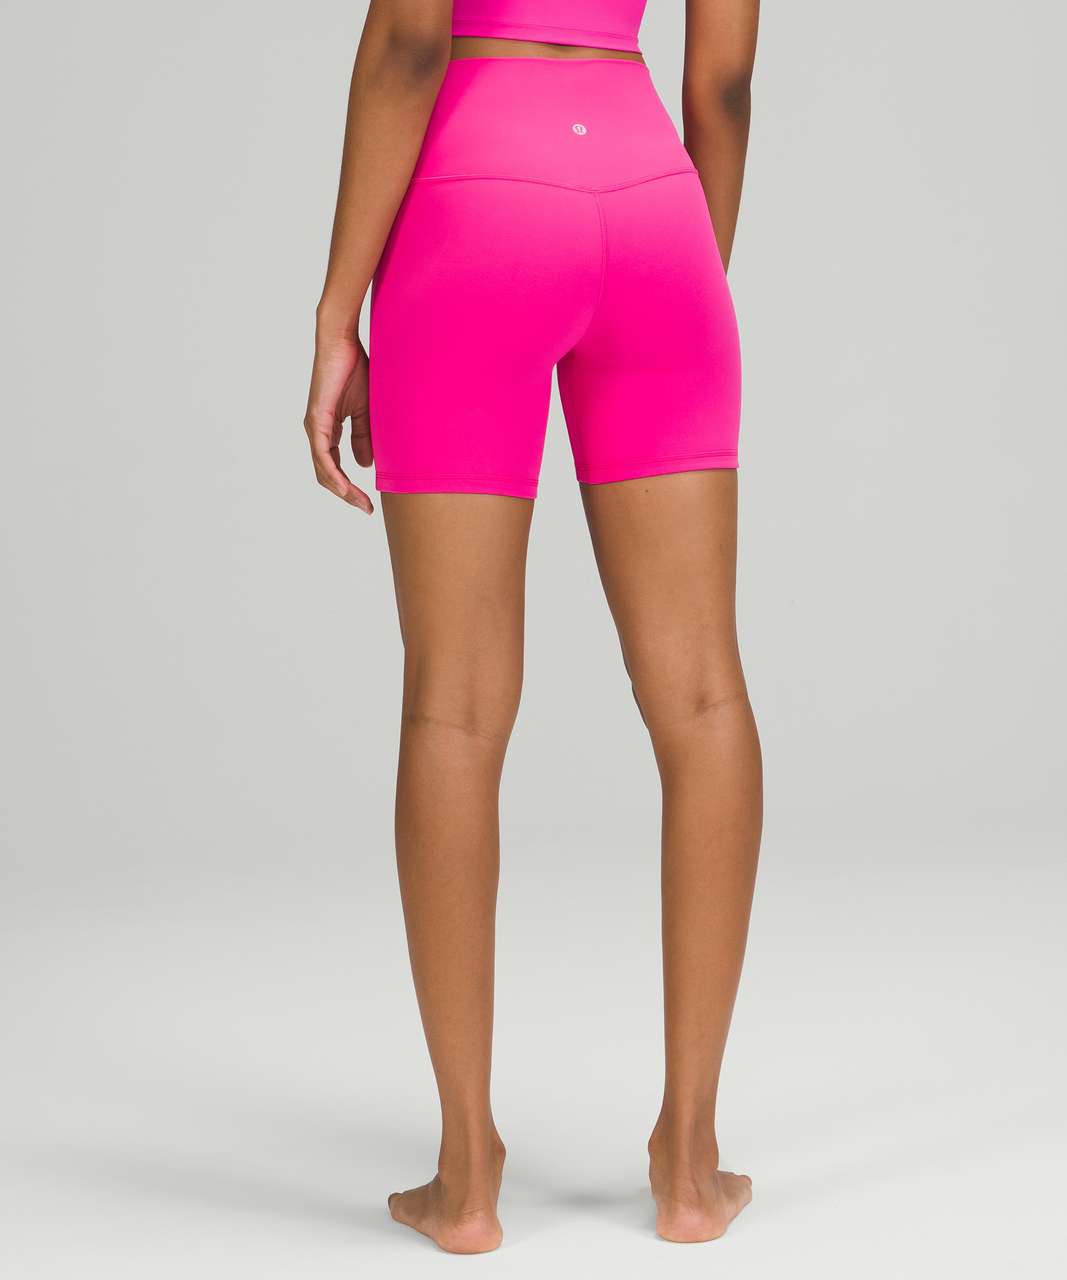 A Bright Lululemon Workout Outfit: Pink Speed Shorts! - Agent